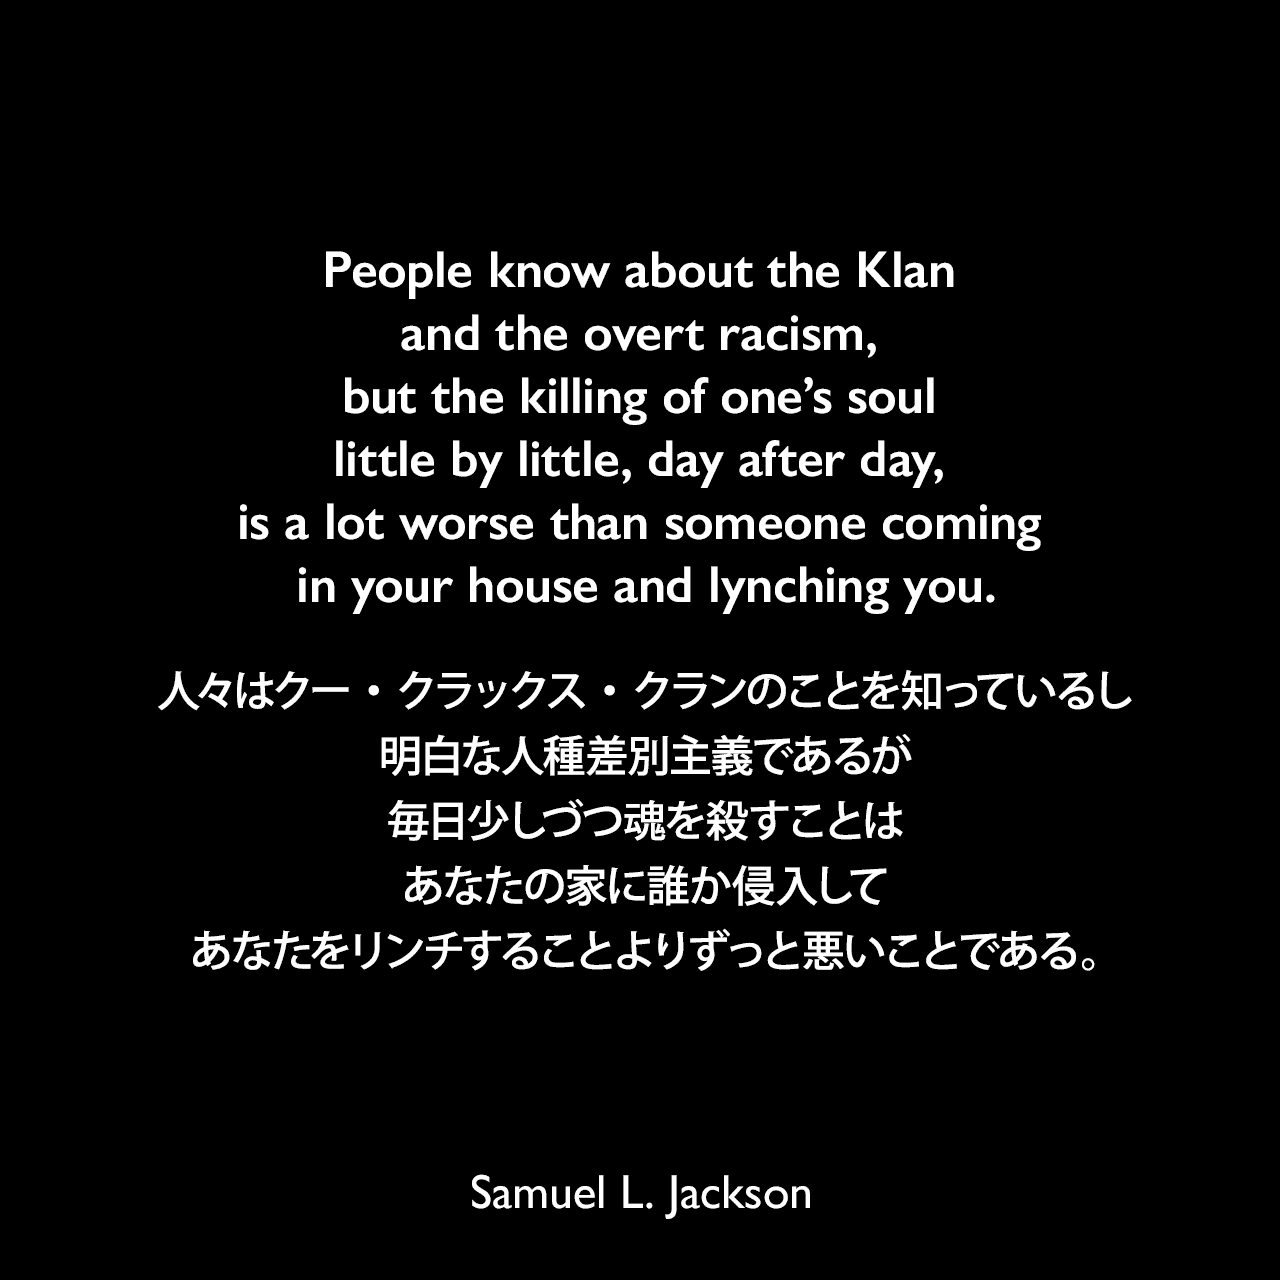 People know about the Klan and the overt racism, but the killing of one’s soul little by little, day after day, is a lot worse than someone coming in your house and lynching you.人々はクー・クラックス・クランのことを知っているし、明白な人種差別主義であるが、毎日少しづつ魂を殺すことは、あなたの家に誰か侵入してあなたをリンチすることよりずっと悪いことである。Samuel Leroy Jackson